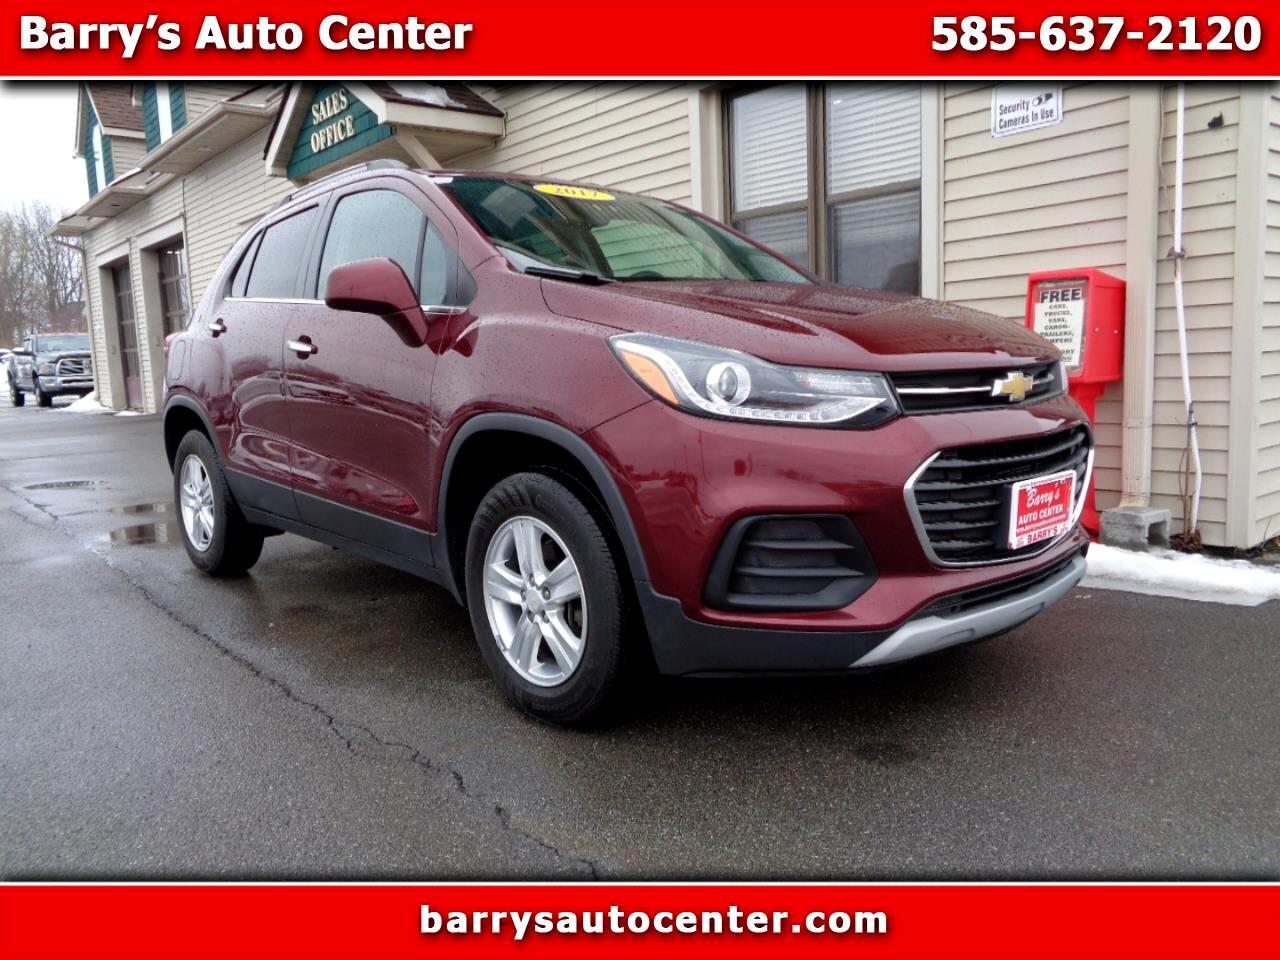 Used 2017 Chevrolet Trax LT for Sale in Rochester NY 14420 Barry's Auto ...